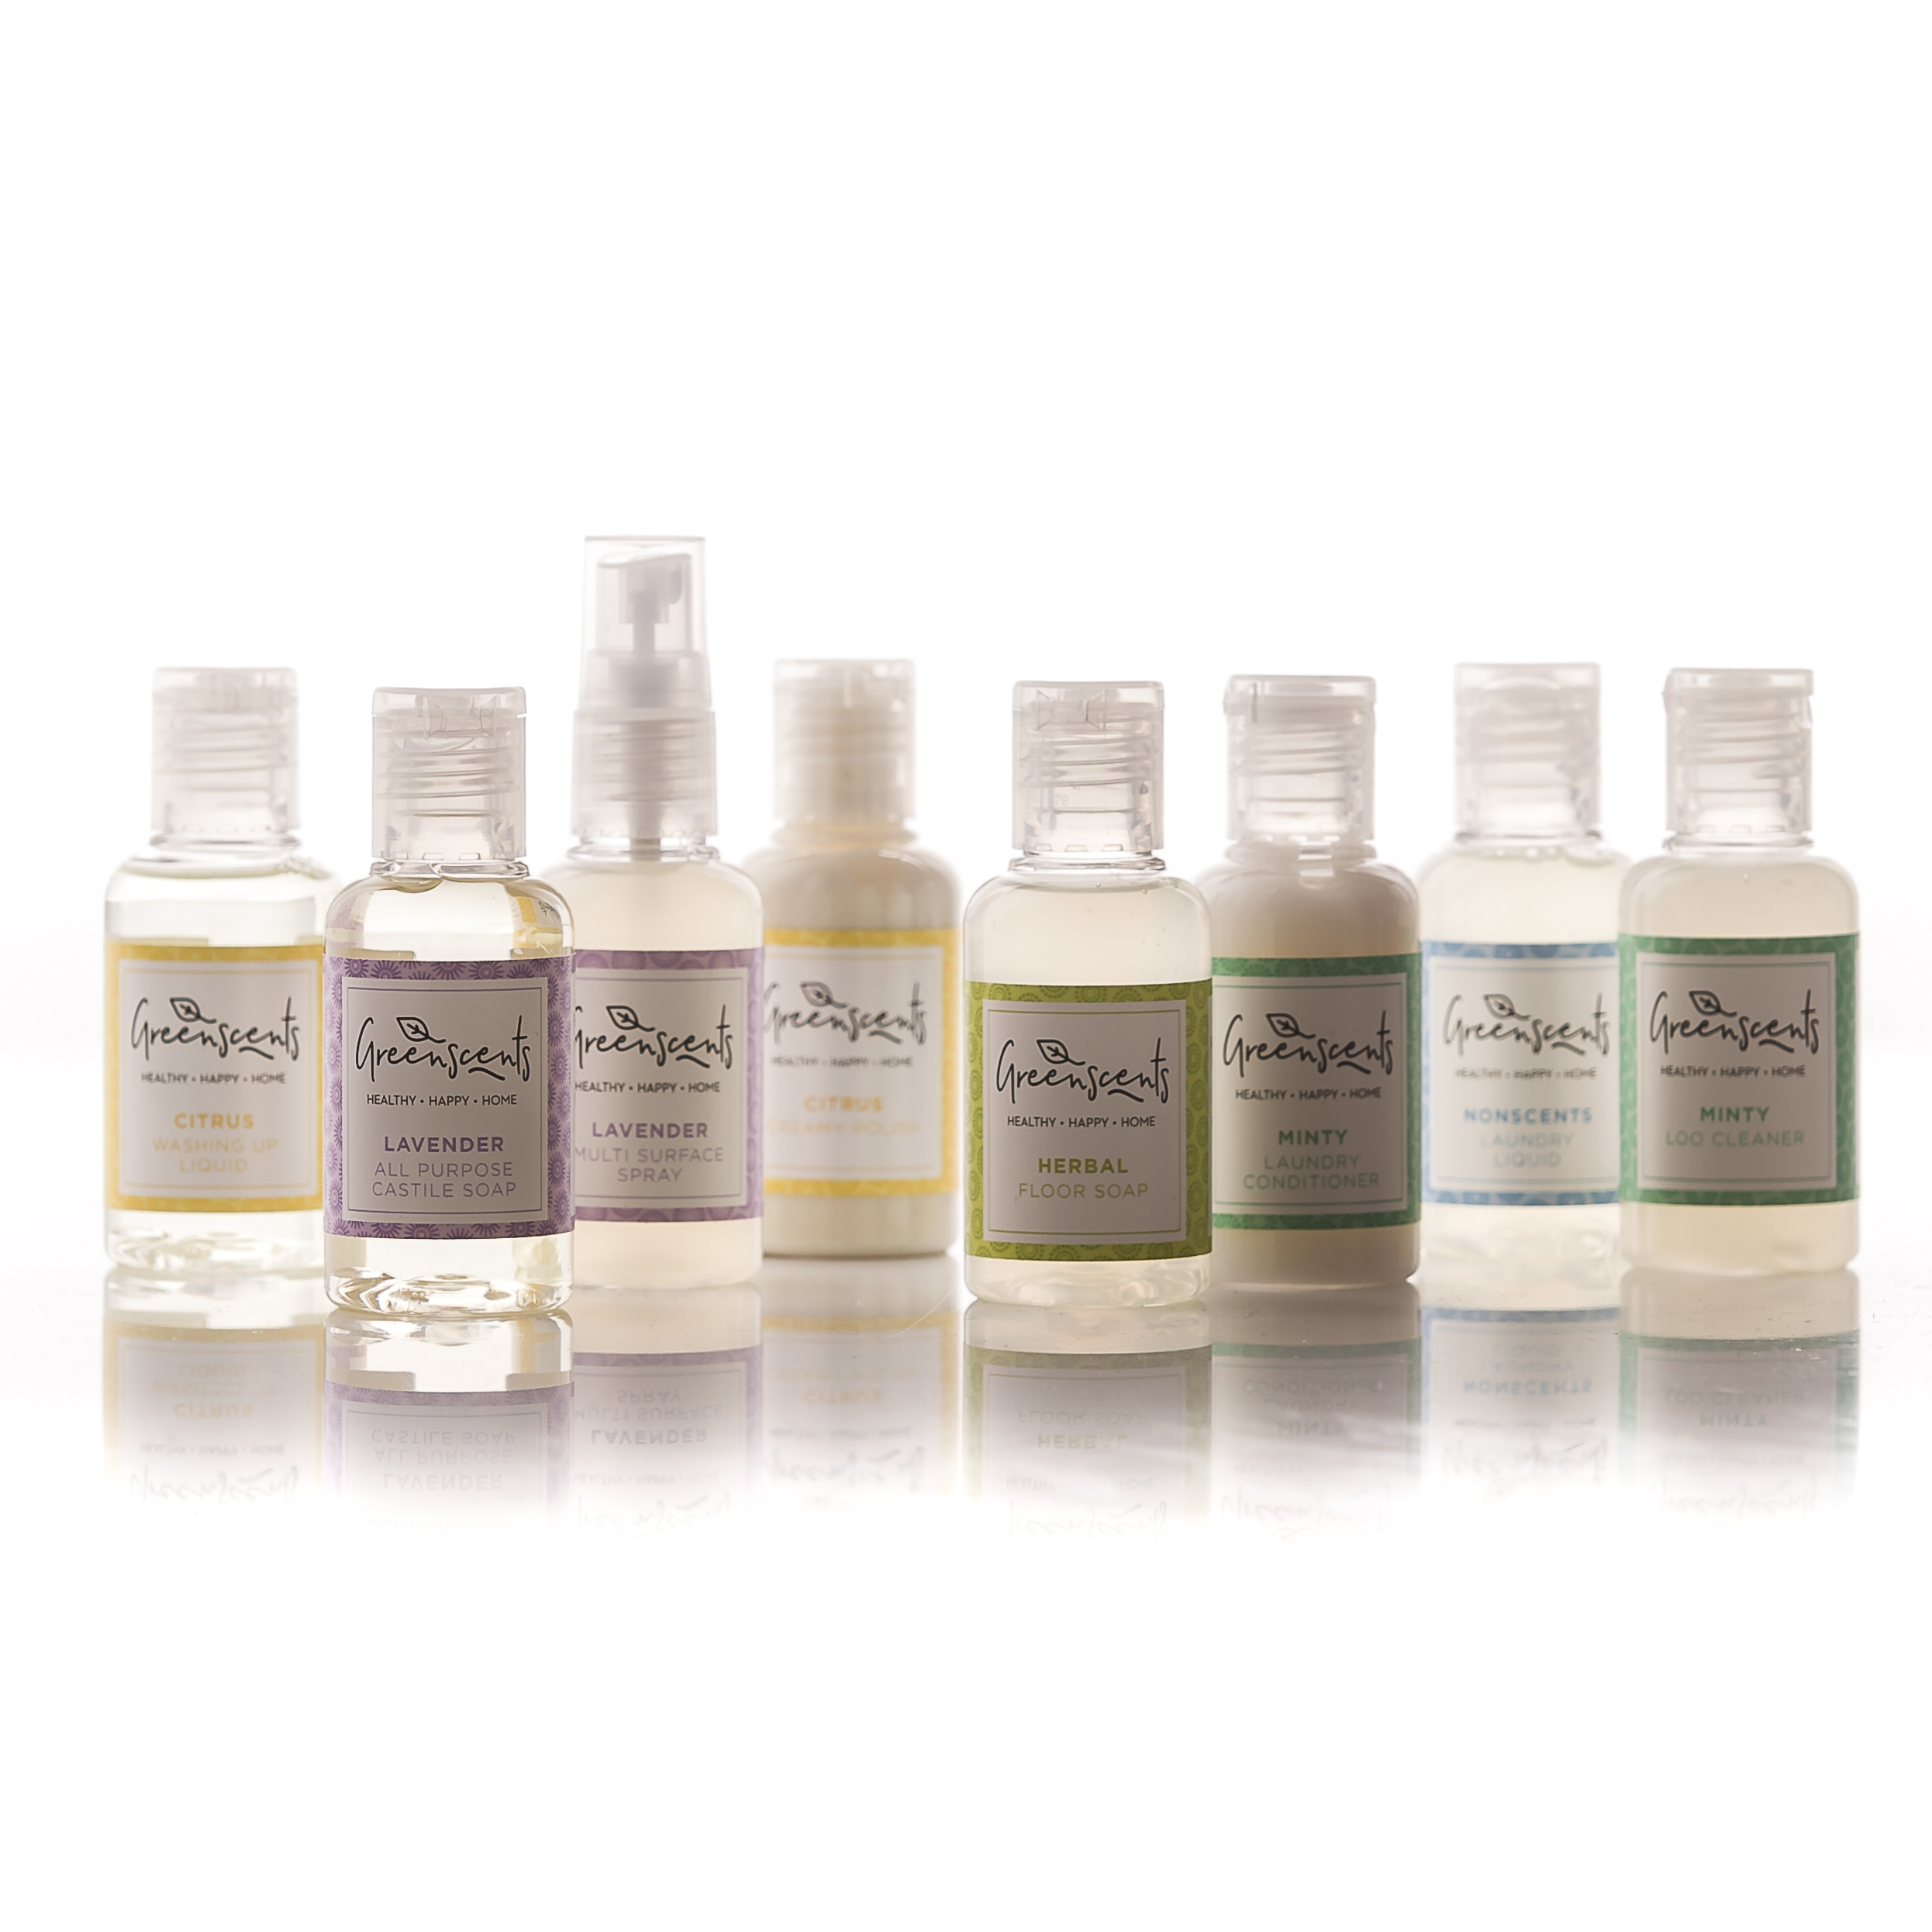 Organic Cleaning And Household Products Minis Collection